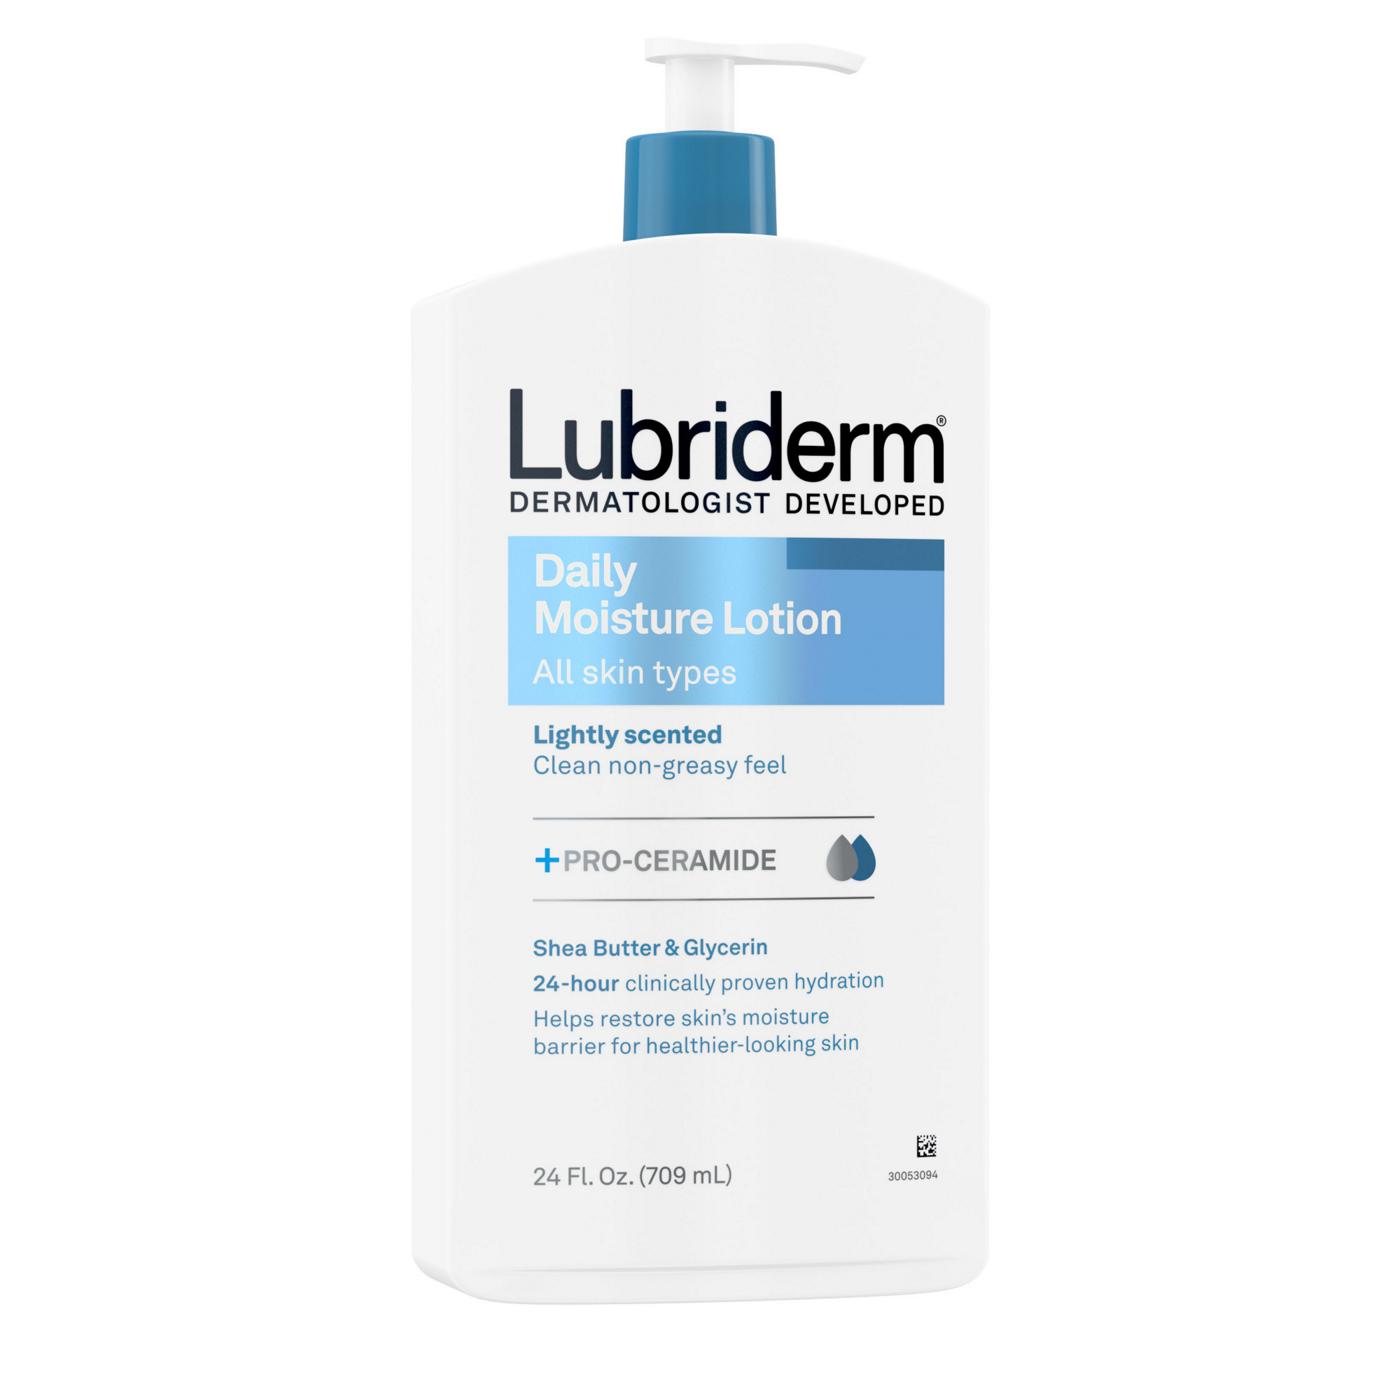 Lubriderm Daily Moisture Lotion; image 7 of 8